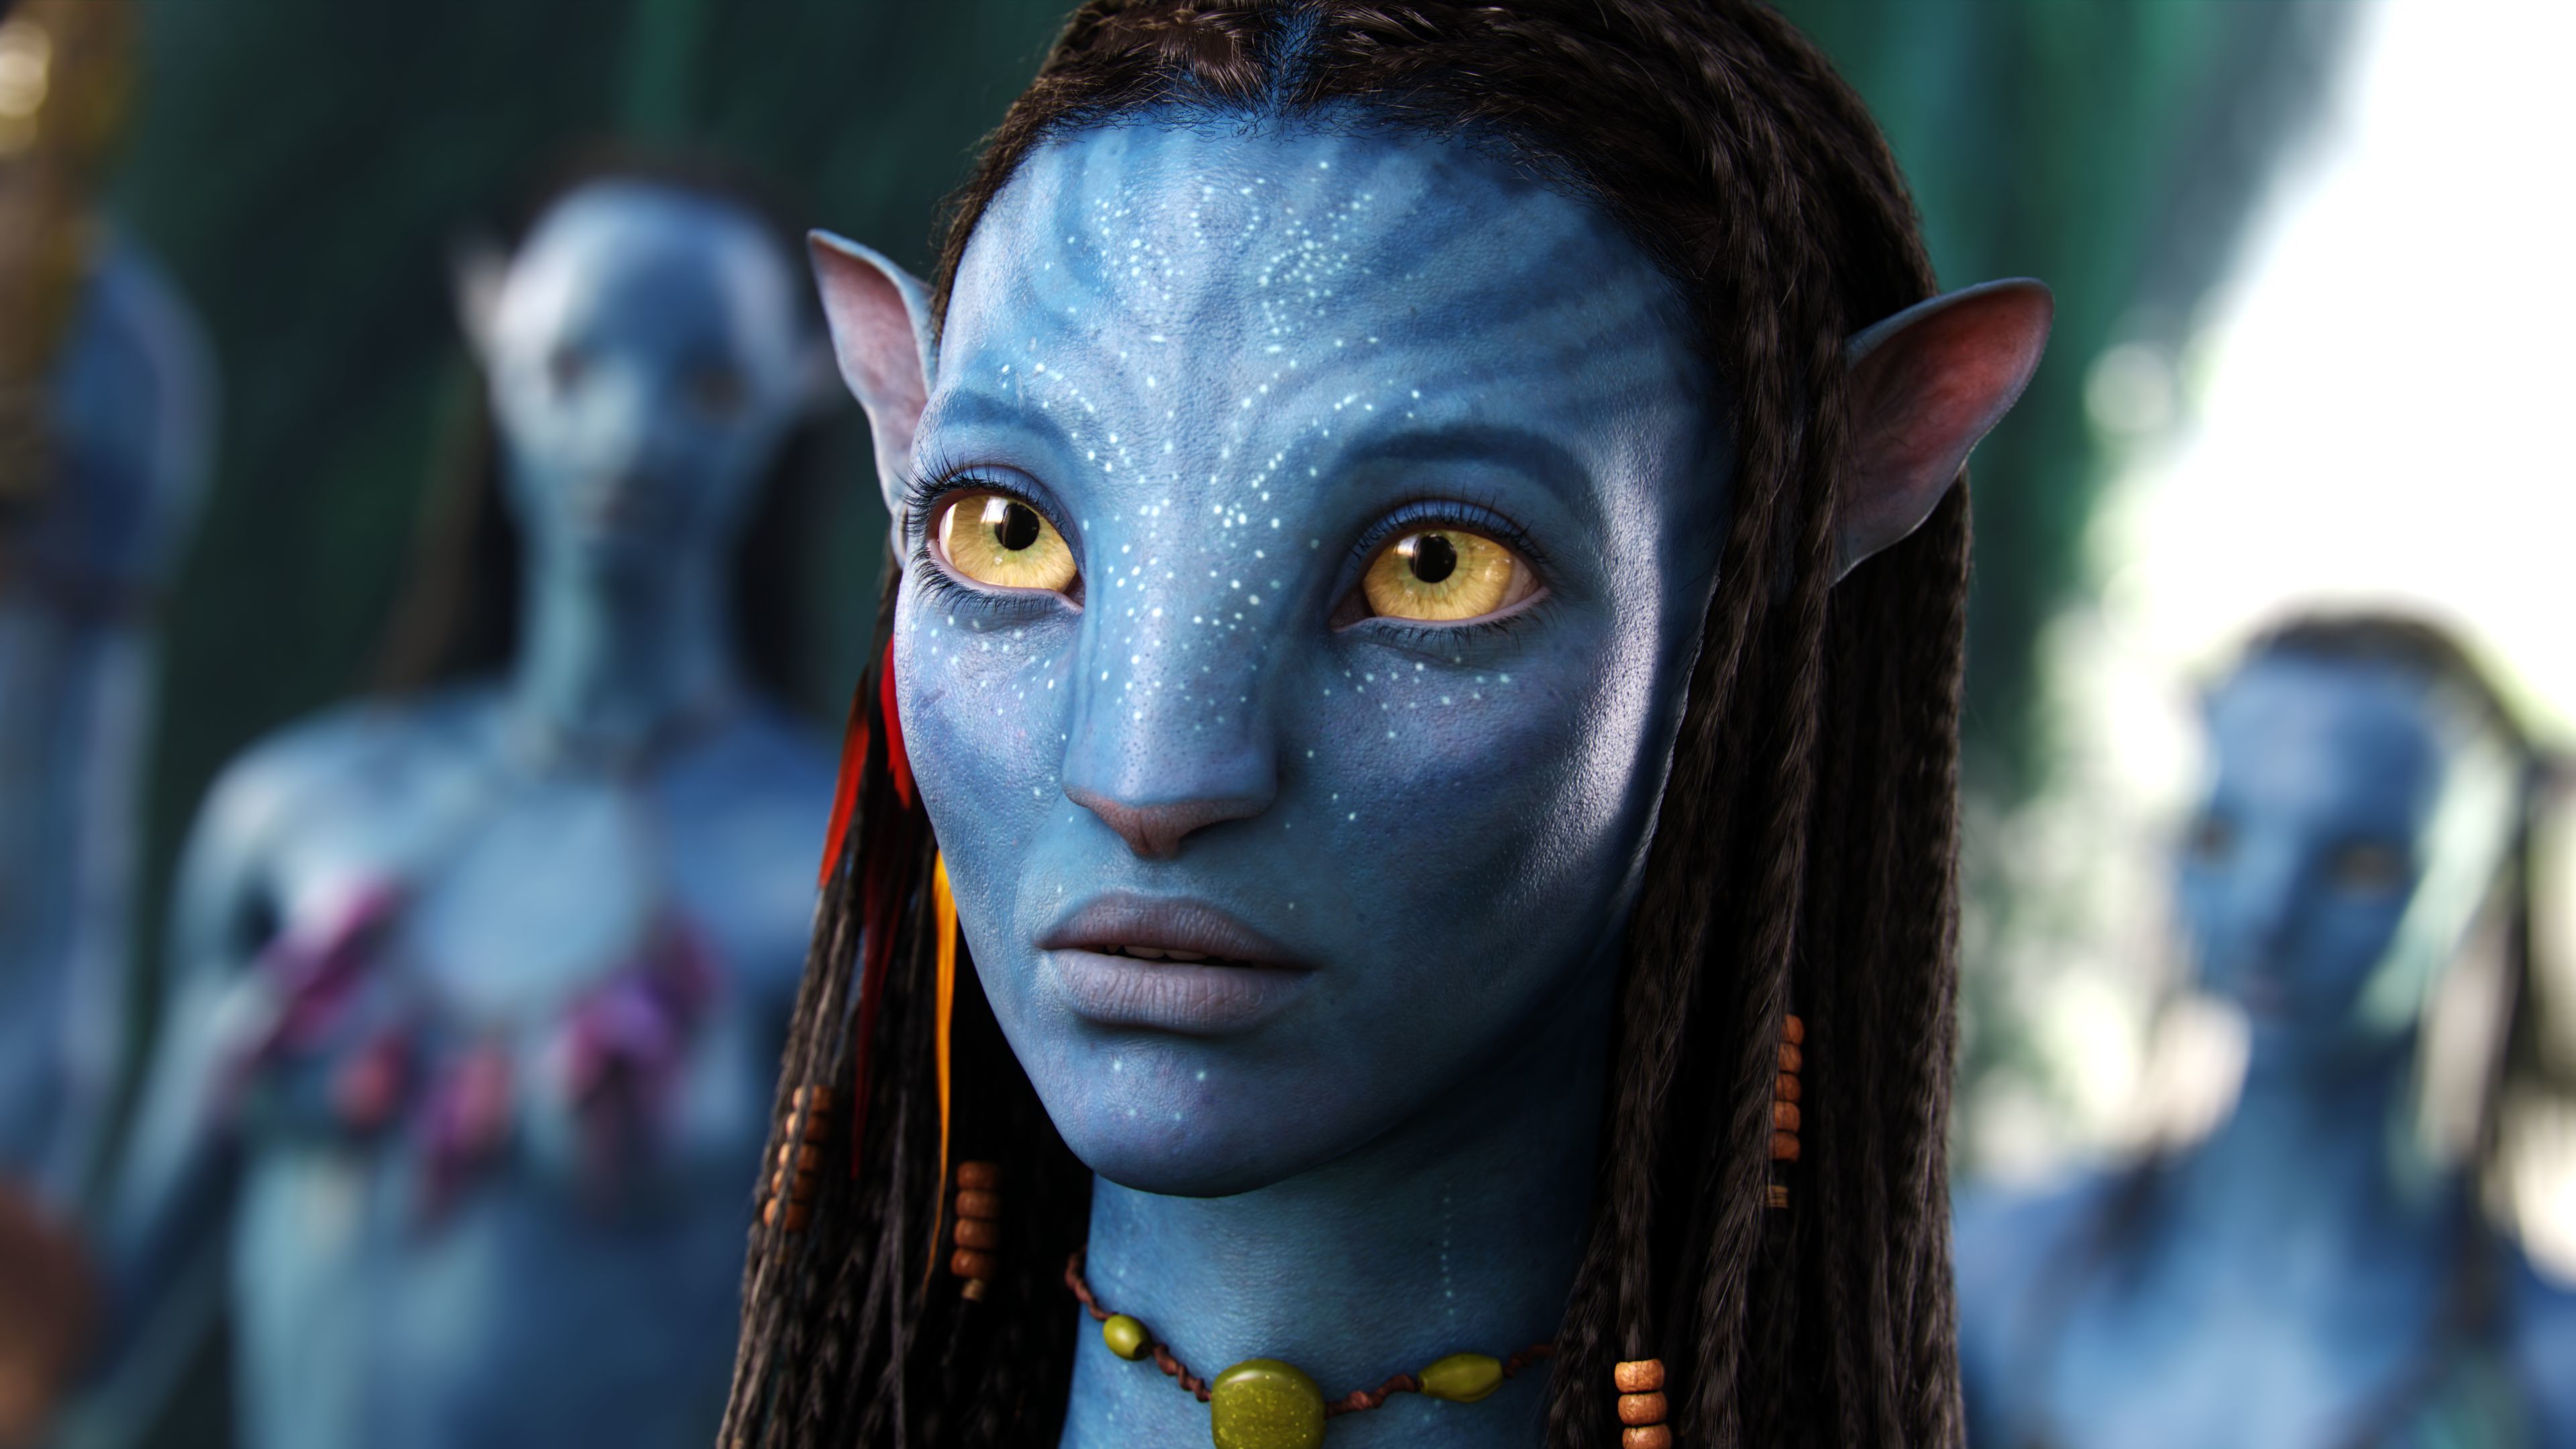 Avatar 2 The Way of Water Online FullMovie HINDI DUBBED Download Free 720p  480p and 1080pss Profile  IGN